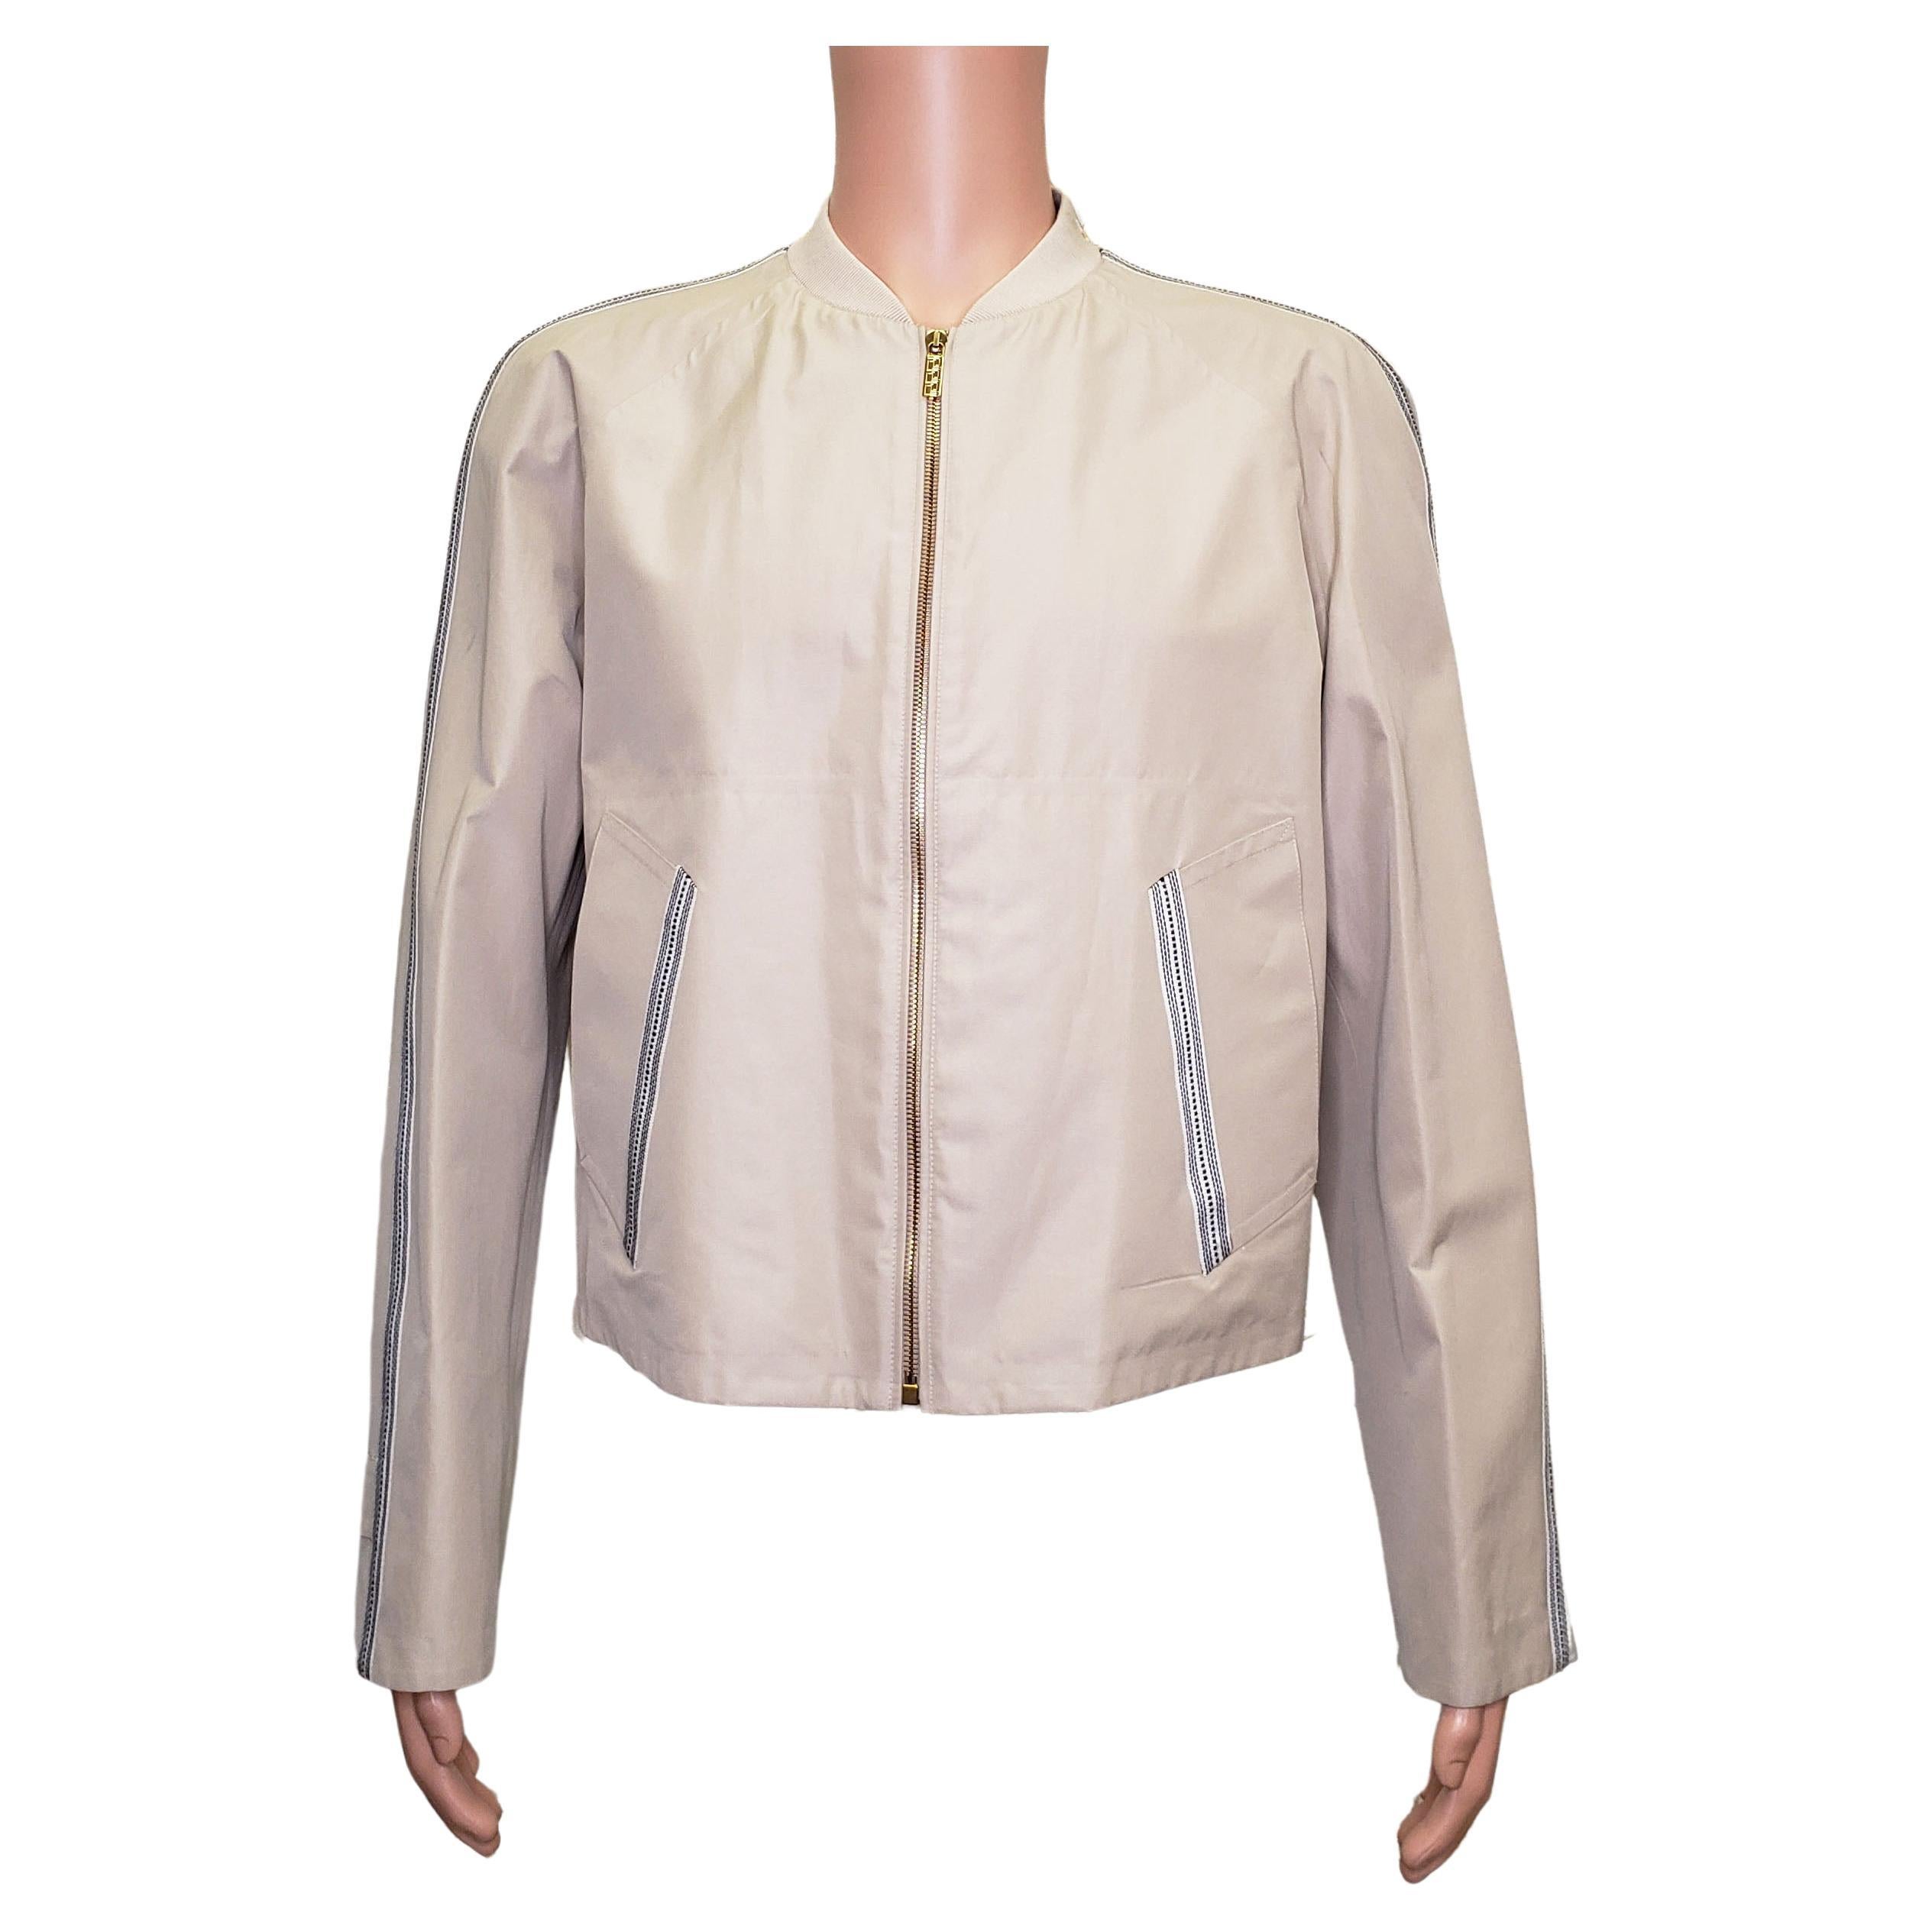 S/S 2016 L#17 NEW VERSACE BEIGE BOMBER JACKET with ZIPPER CLOSURE 50 - 40 For Sale